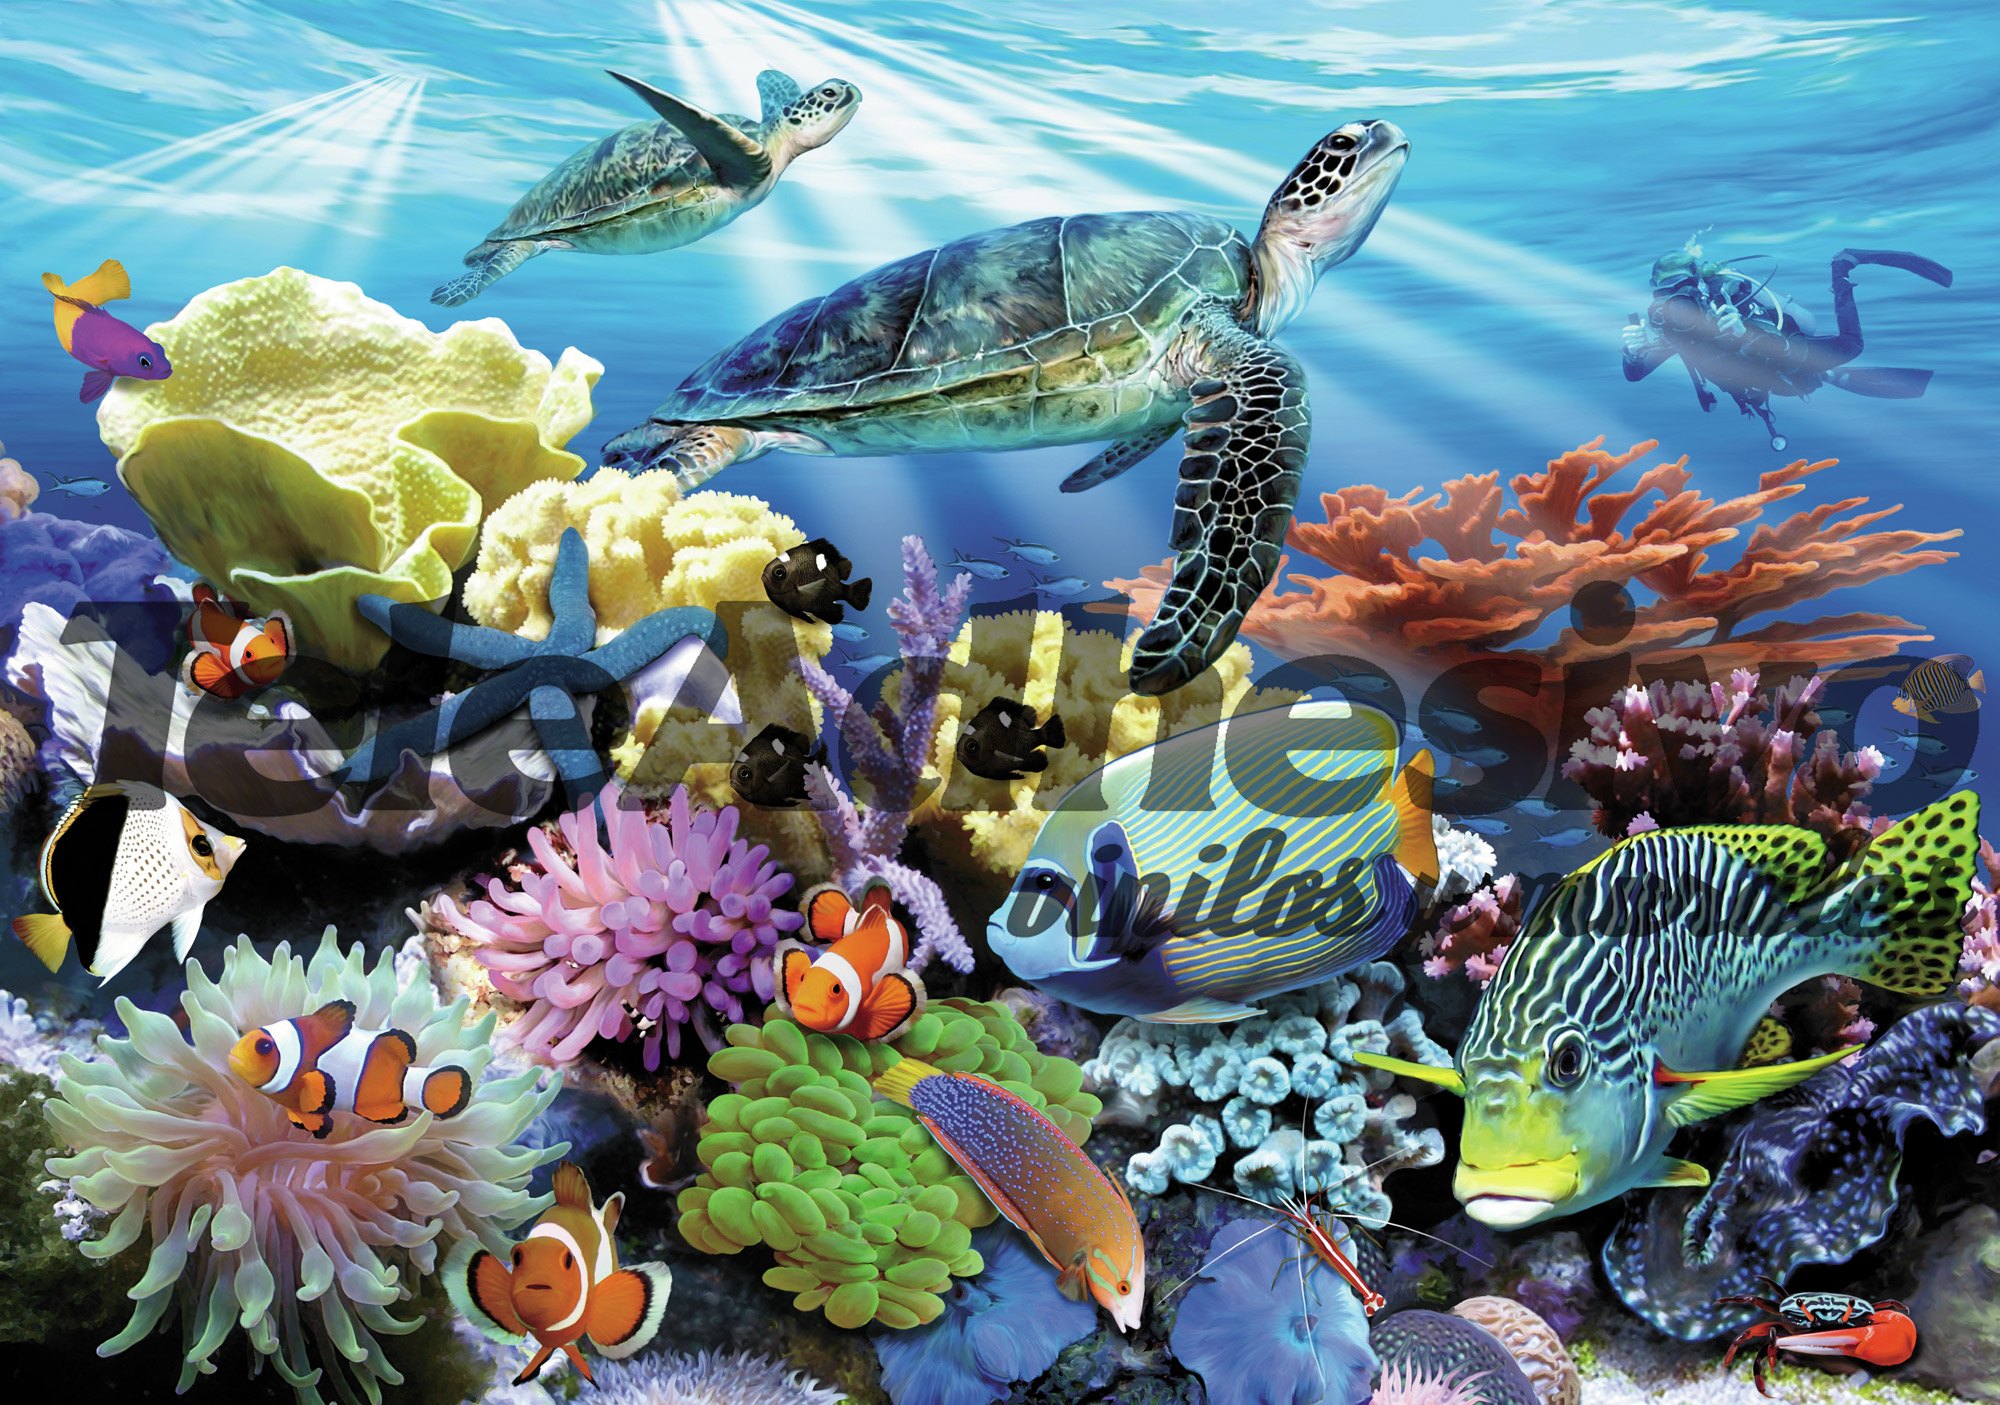 Wall Murals: Bottom of the sea